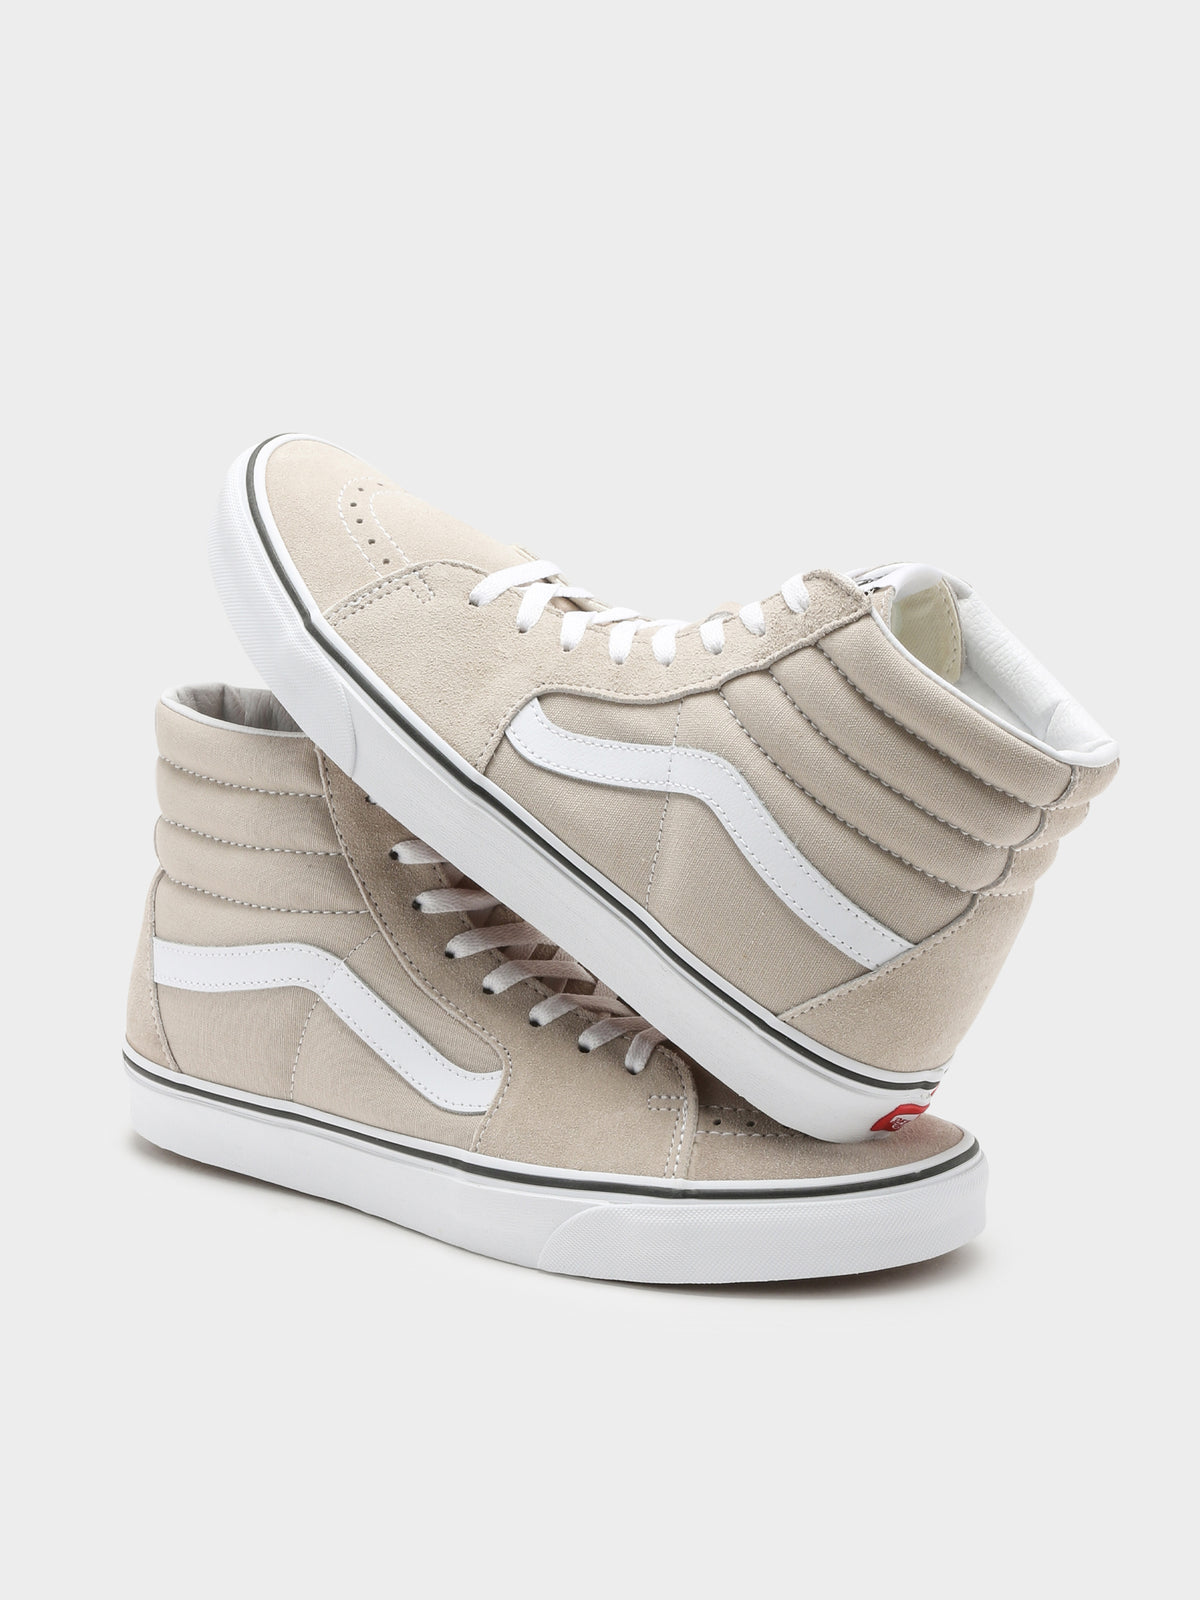 Womens Sk8 High Color Theory Sneakers in French Oak